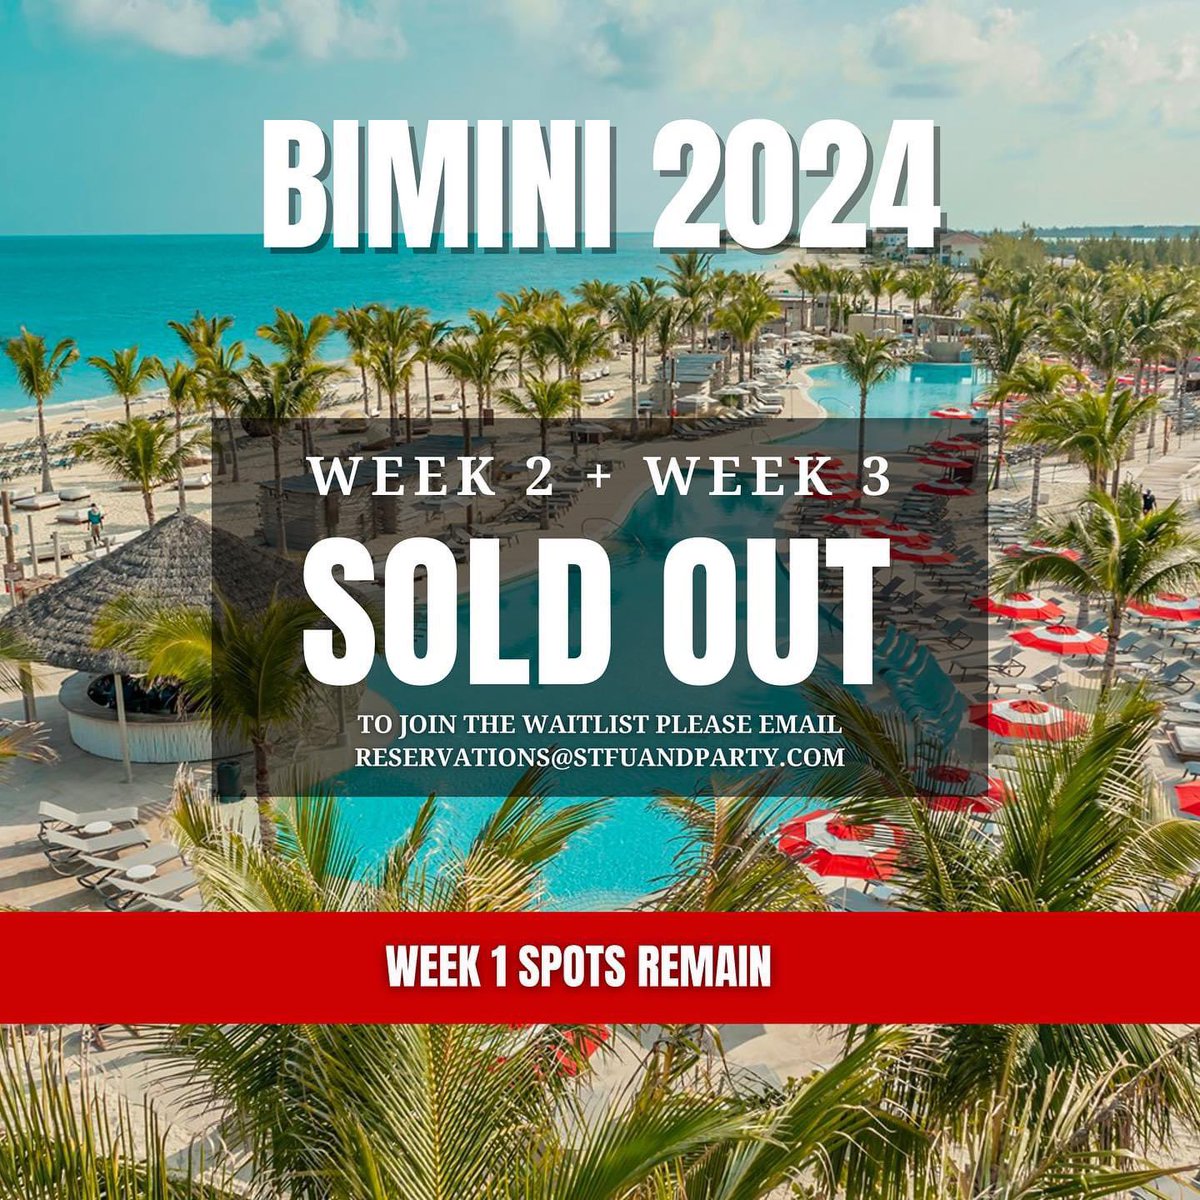 BIMINI WEEK 2 and WEEK 3 are SOLD OUT! ⚠️ WEEK 1 IS STILL AVAILABLE — BOOK NOW BEFORE IT’s COMPLETELY SOLD OUT 💫 stfuandbimini.crewfare.com USE THE CODE SEBASYAHDIG for $20 off. Let us know once you’ve secured your trip! #springbreak #bimini #biminispringbreak #book